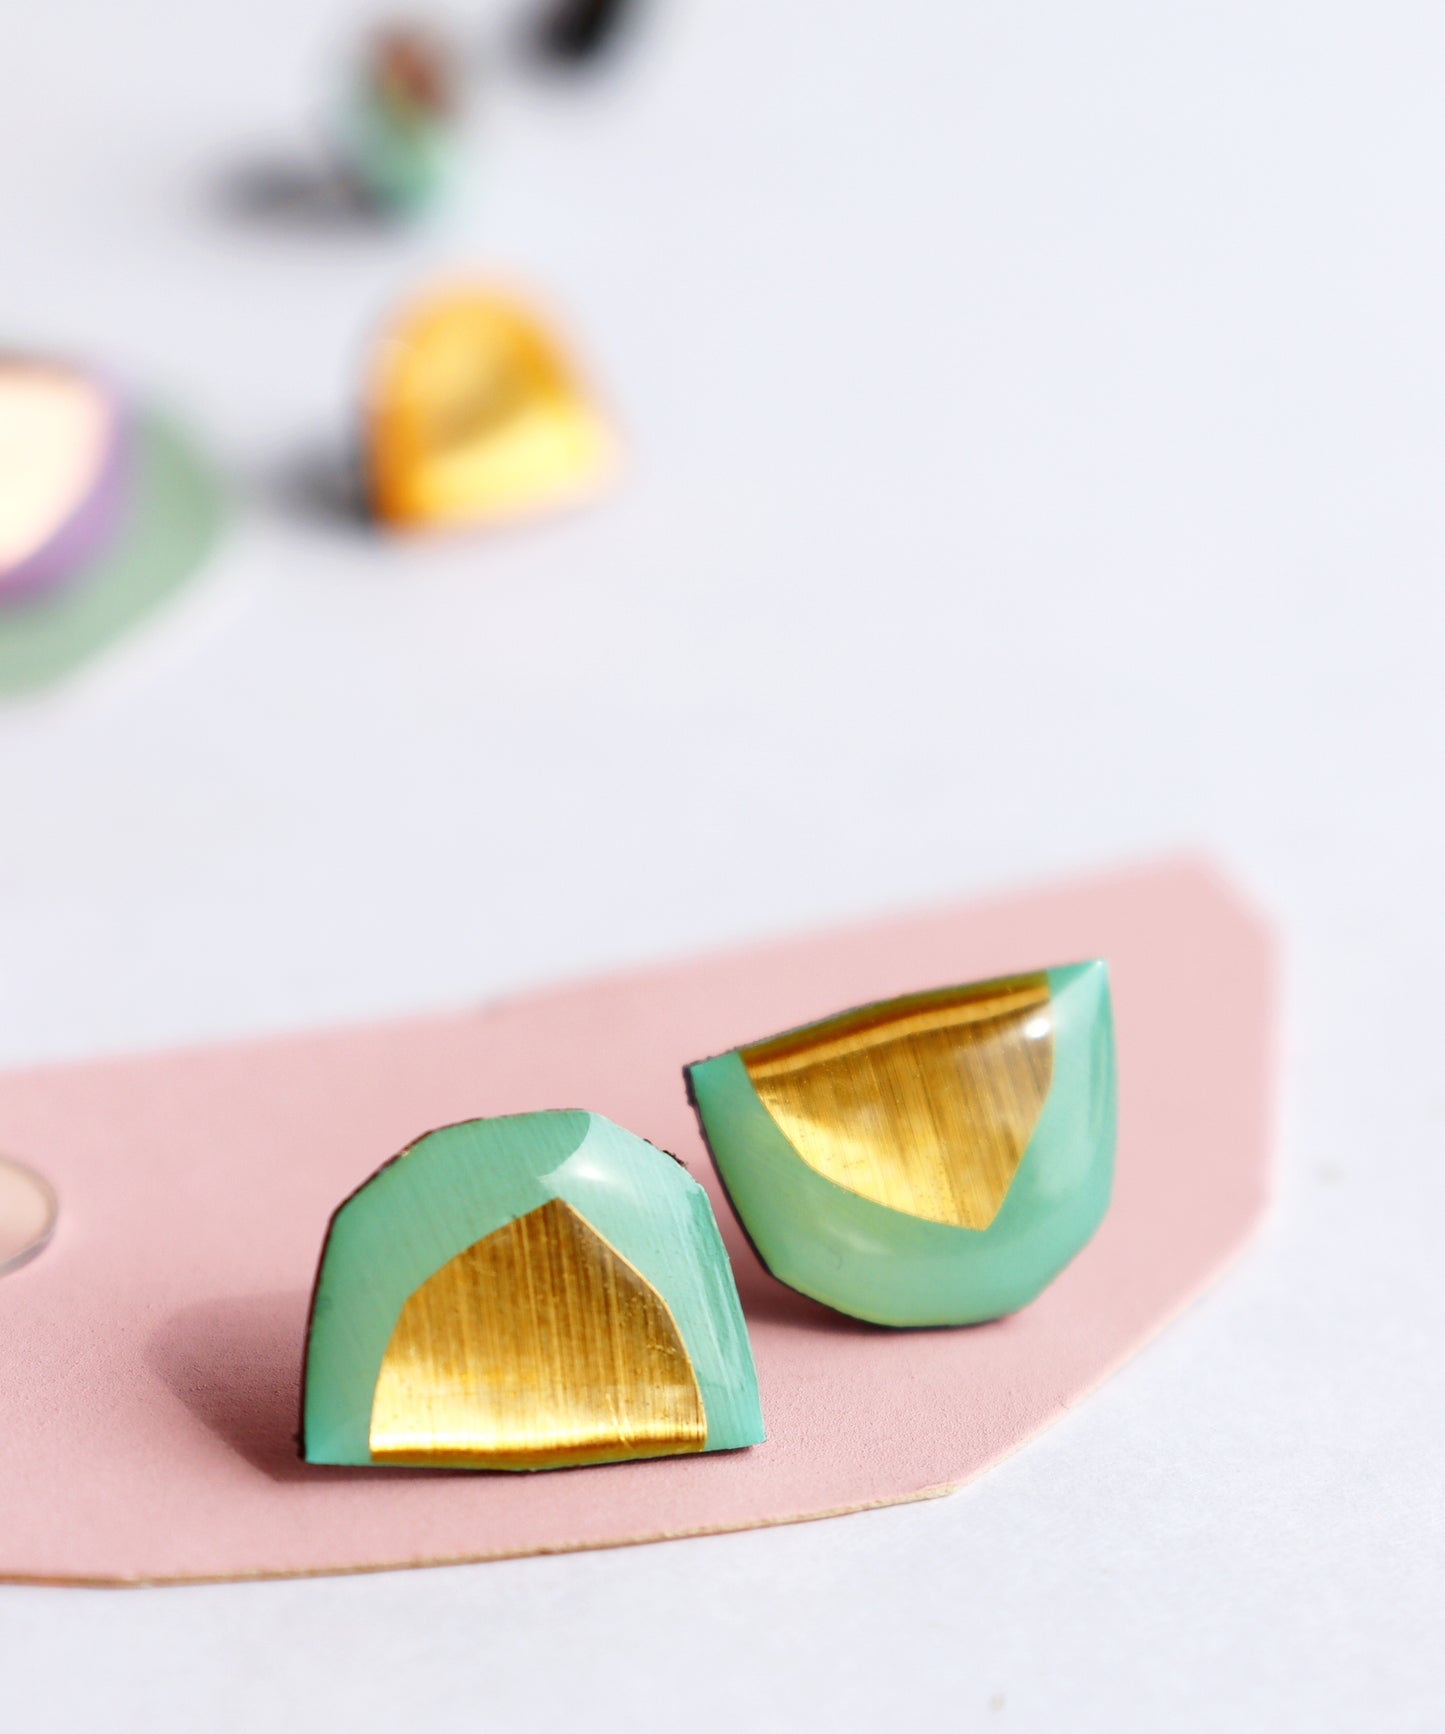 Mint and gold geometric studs handmade in Ireland from recycled vinyl records